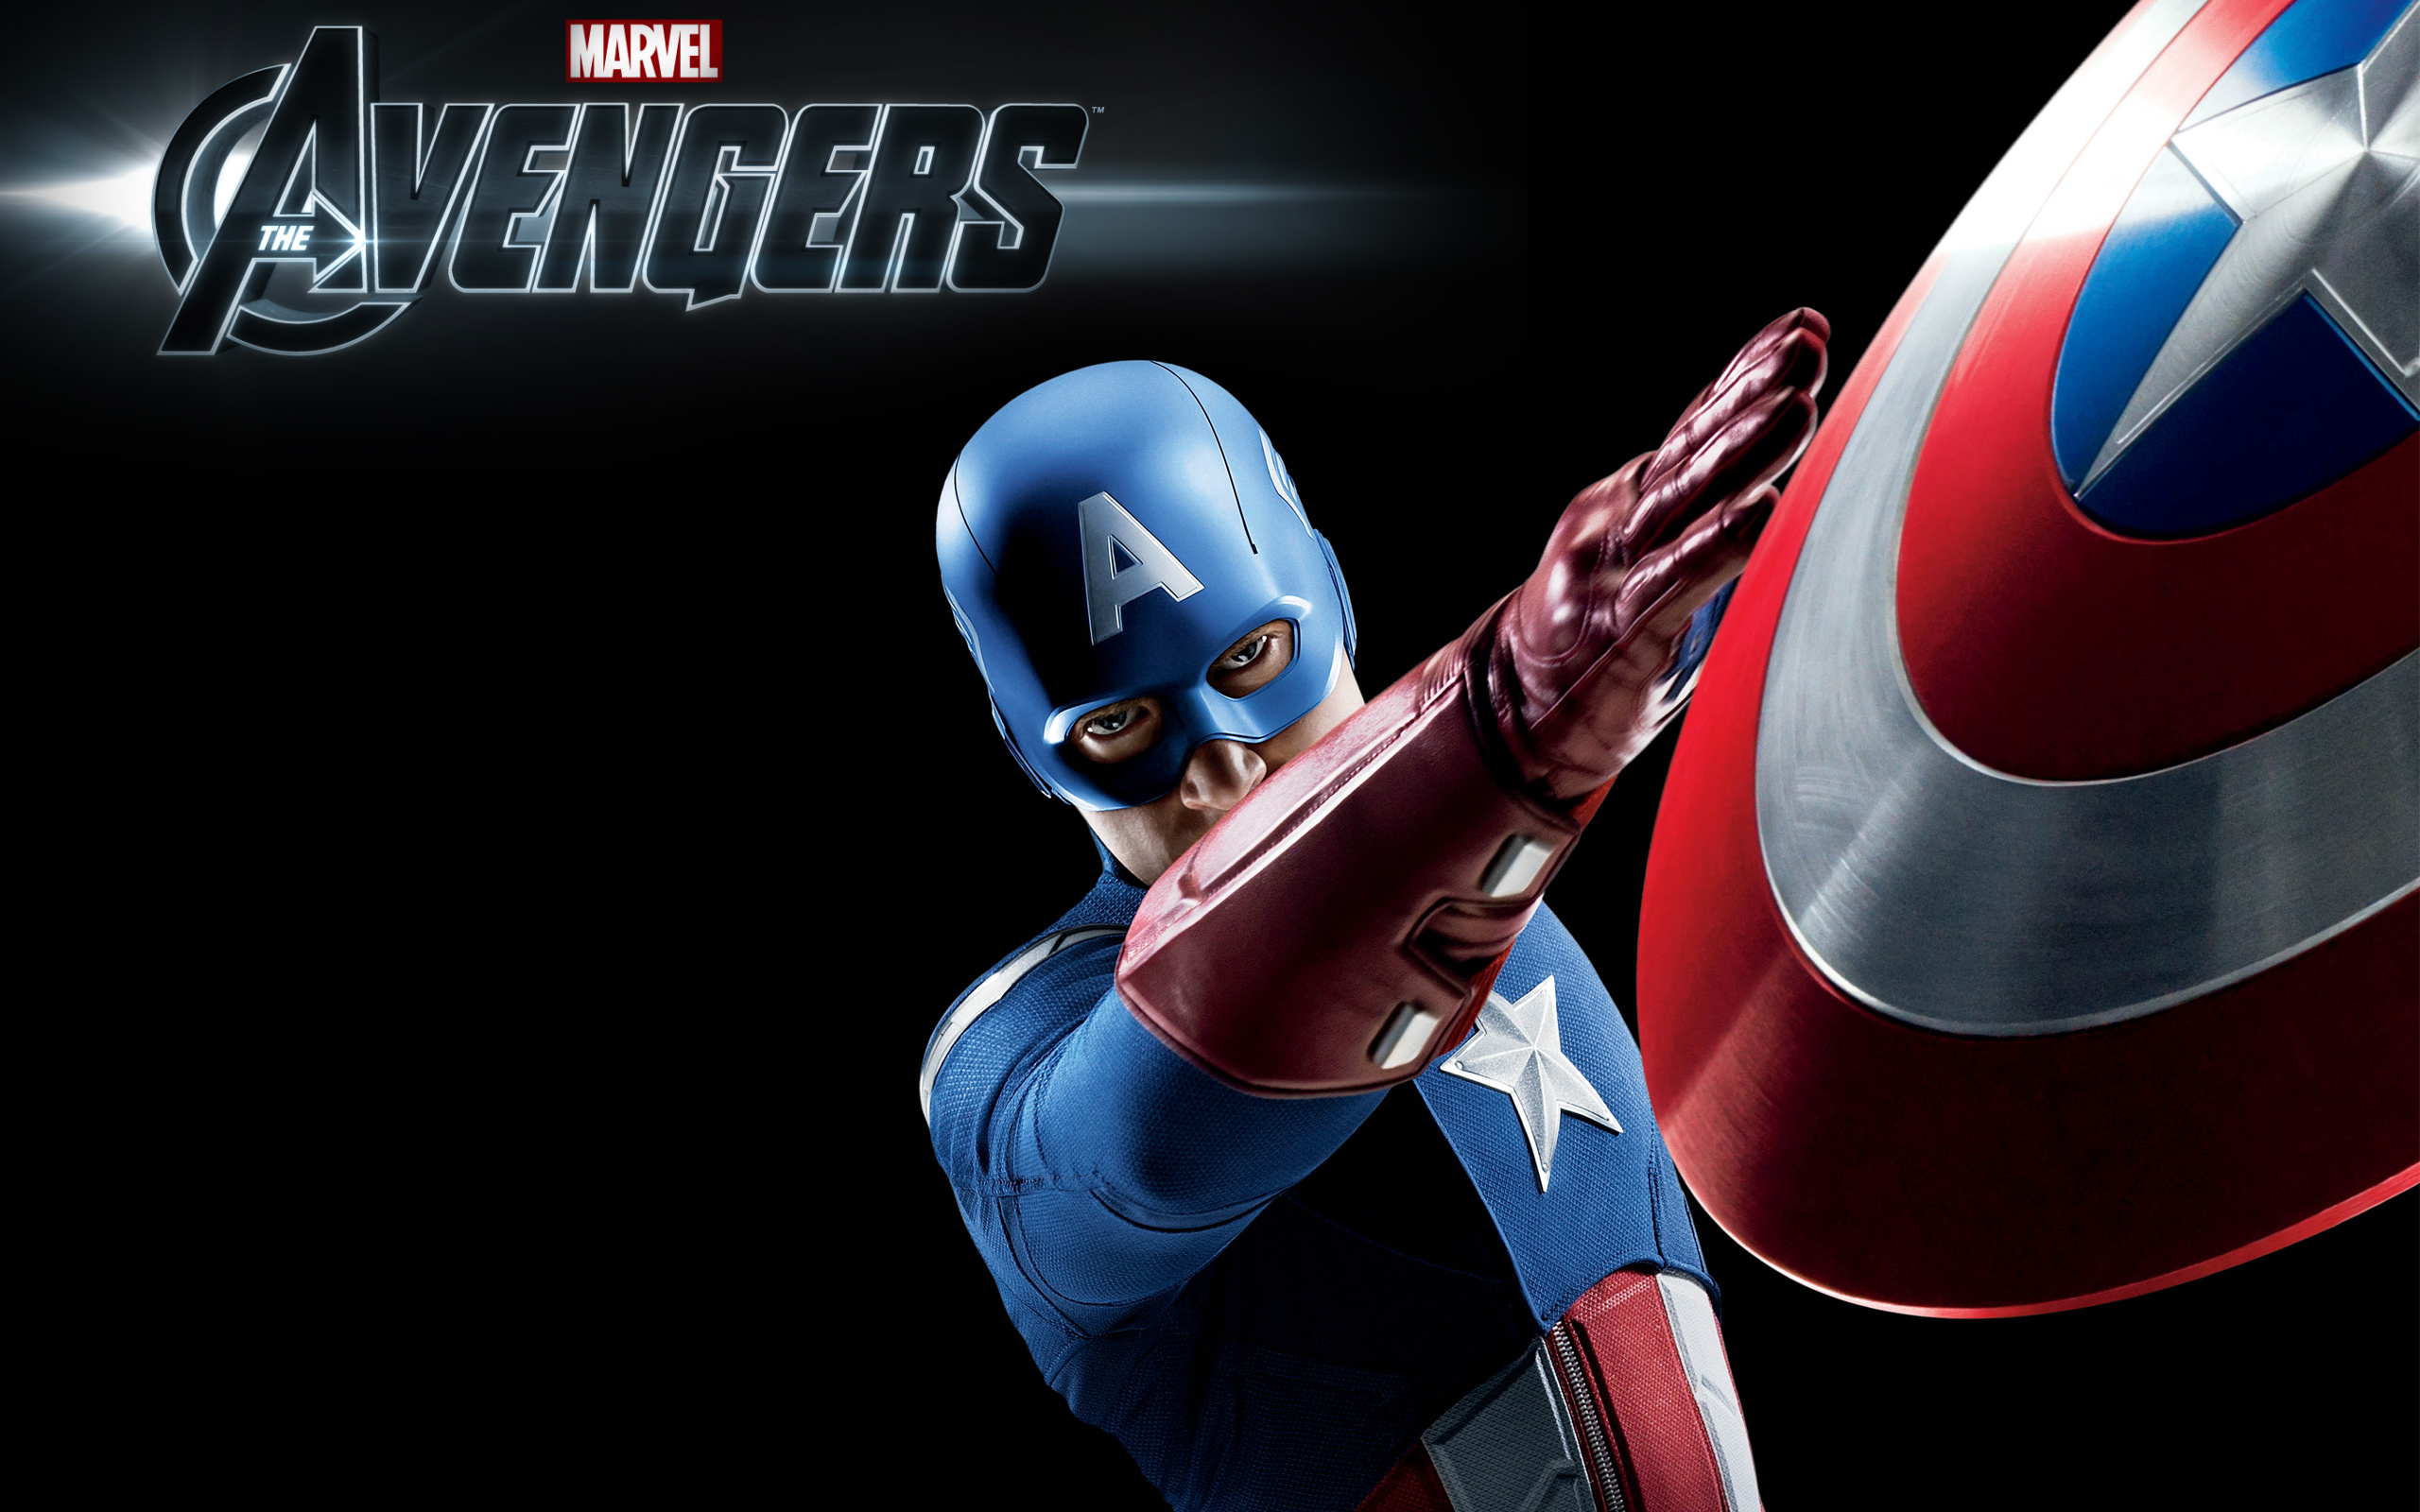 Captain America in The Avengers Wallpapers HD Wallpapers 2560x1600